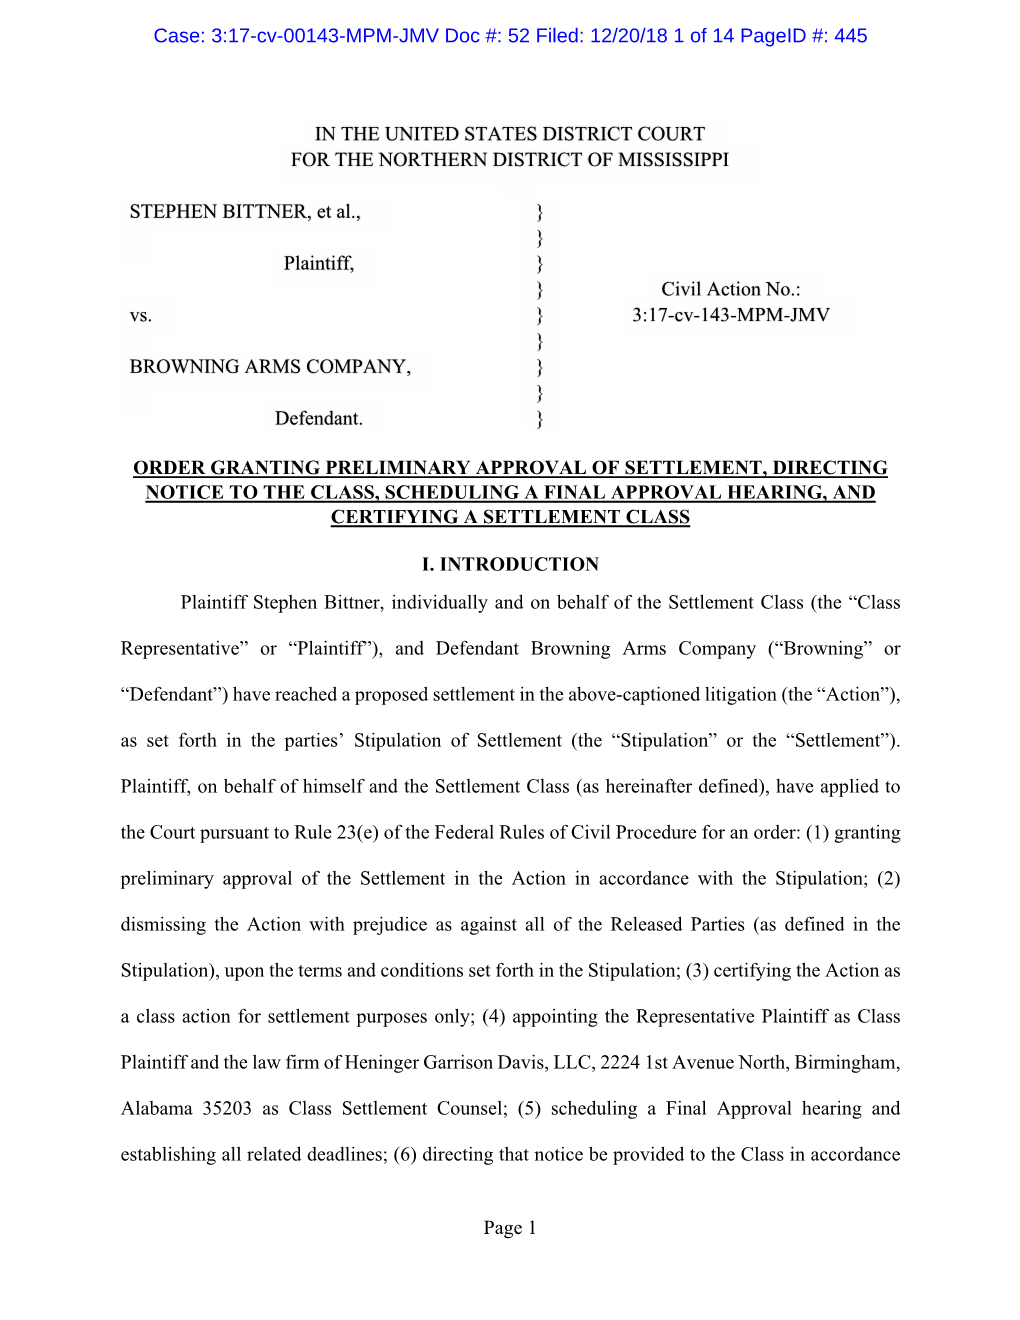 Page 1 in the UNITED STATES DISTRICT COURT for THE